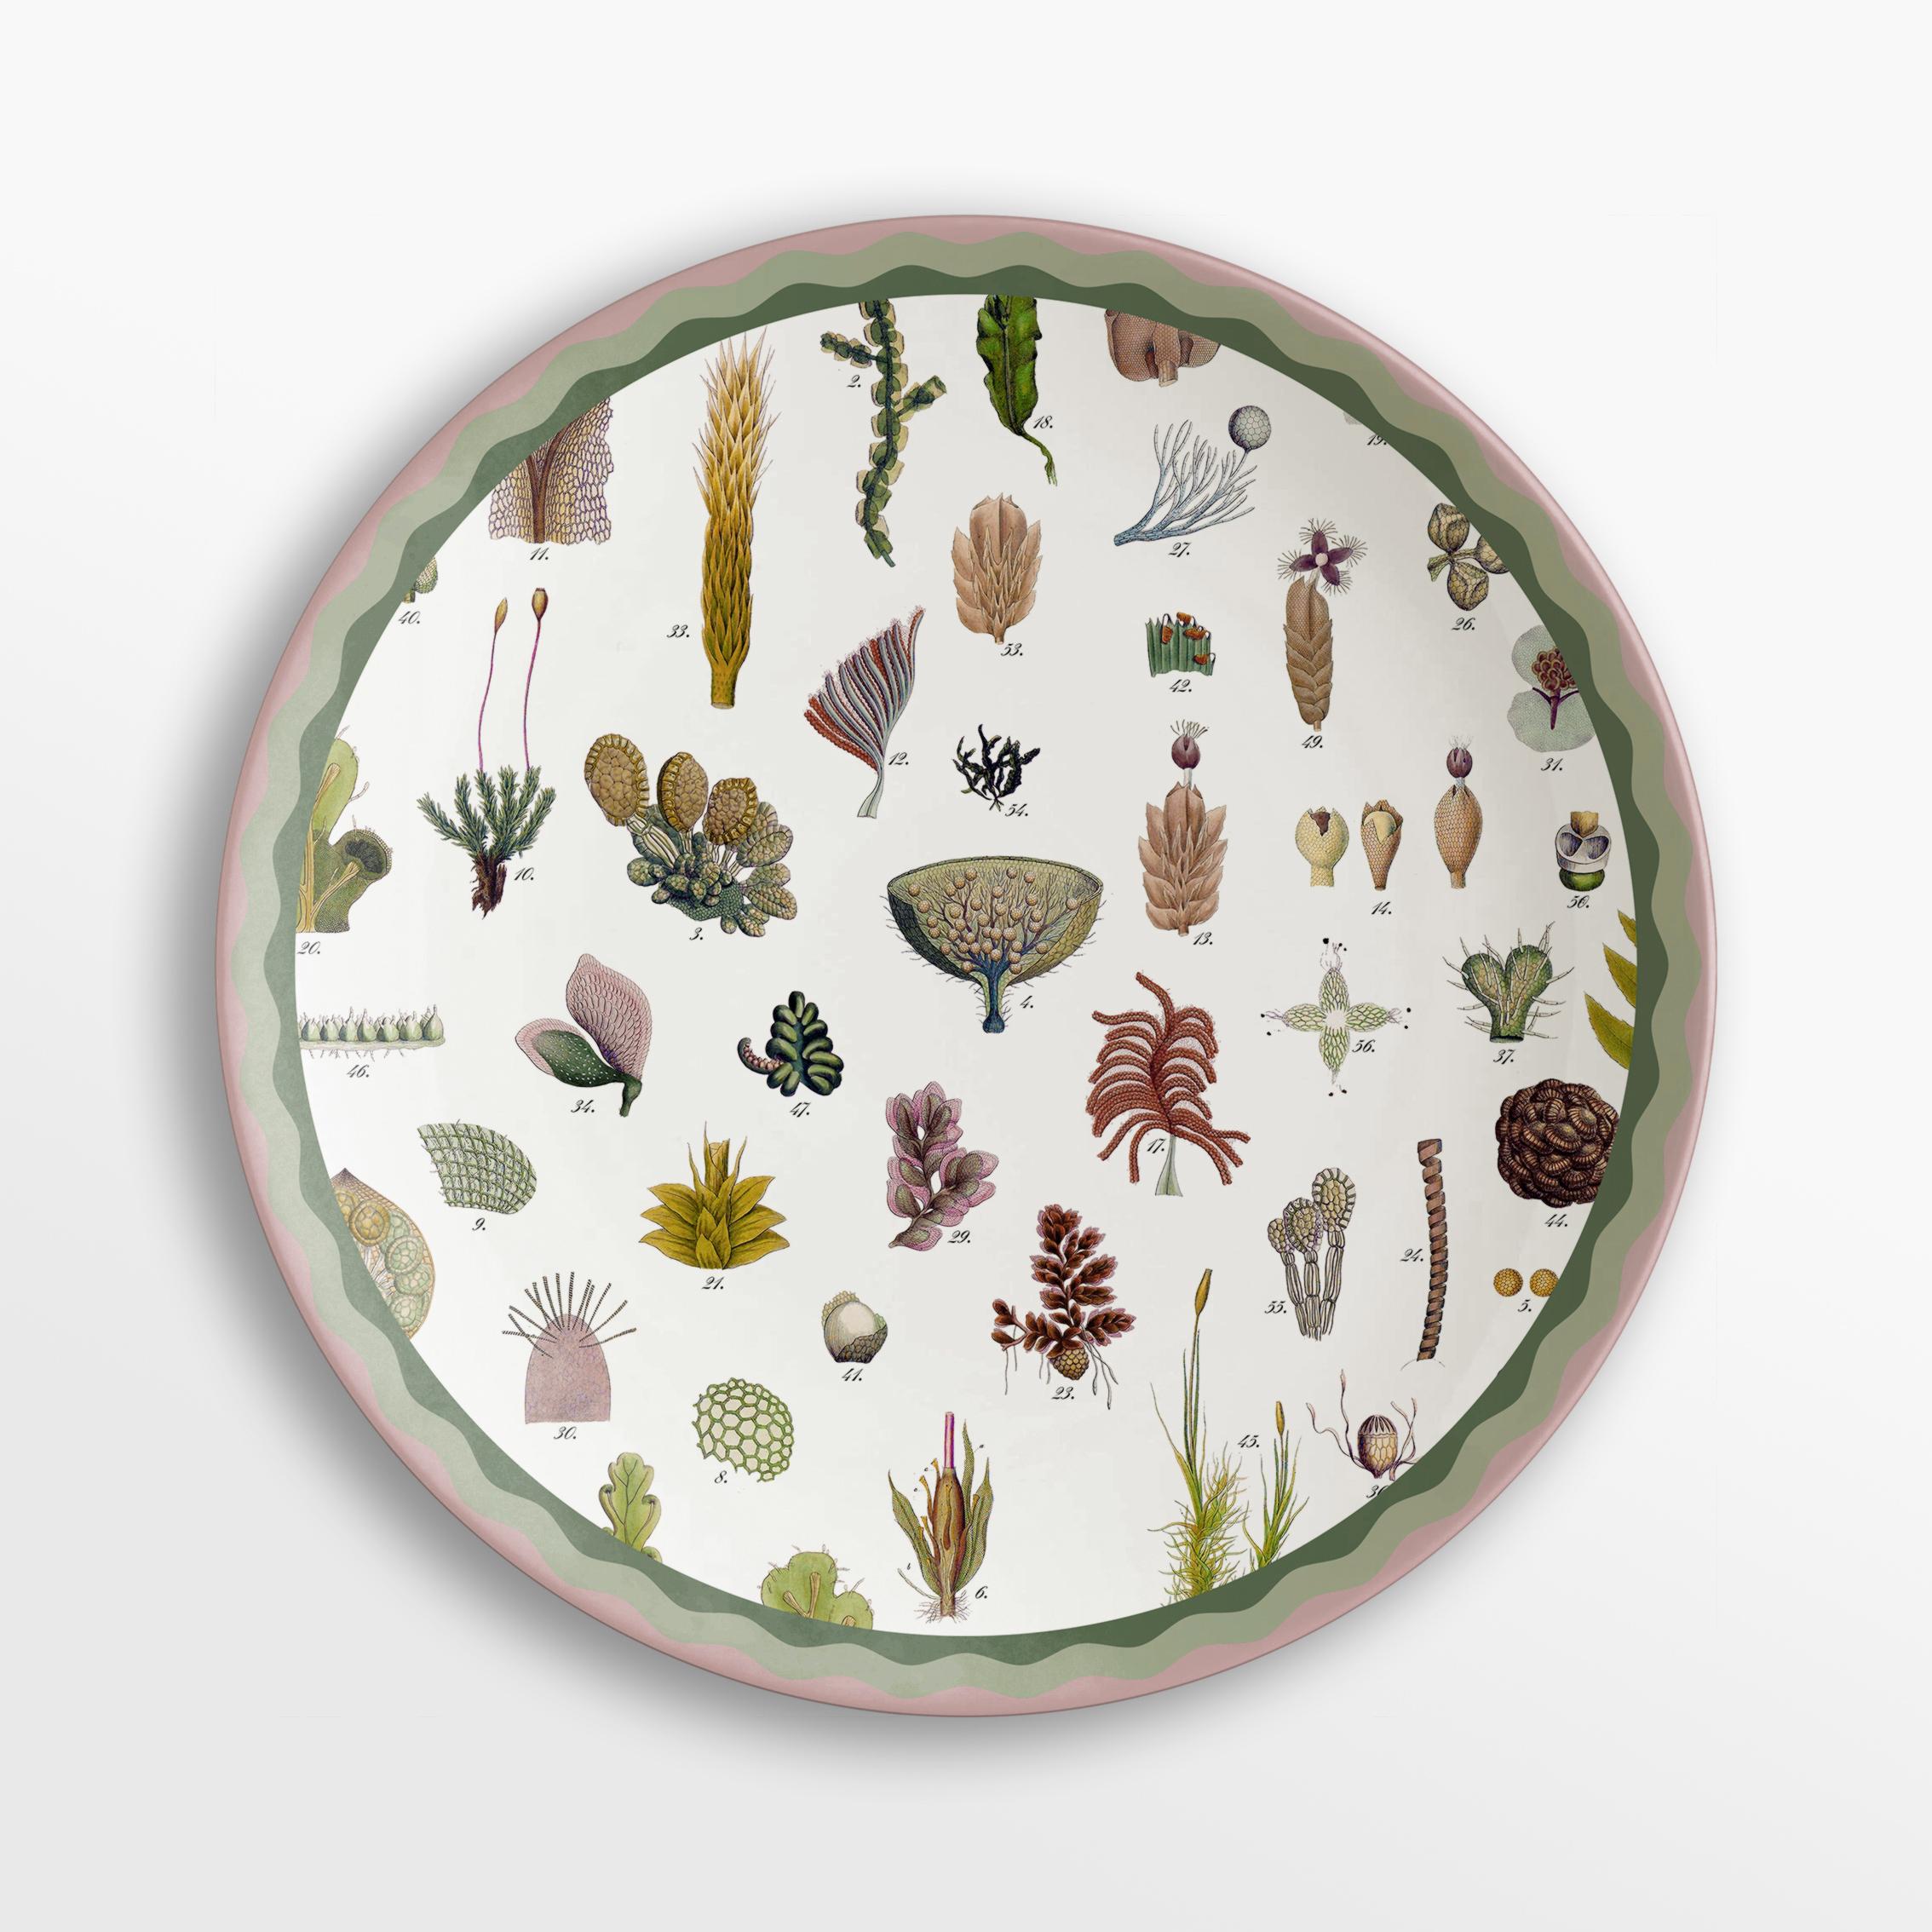 Cabinet de Curiosités, Six Contemporary Decorated Porcelain Dinner Plates In New Condition For Sale In Milano, Lombardia